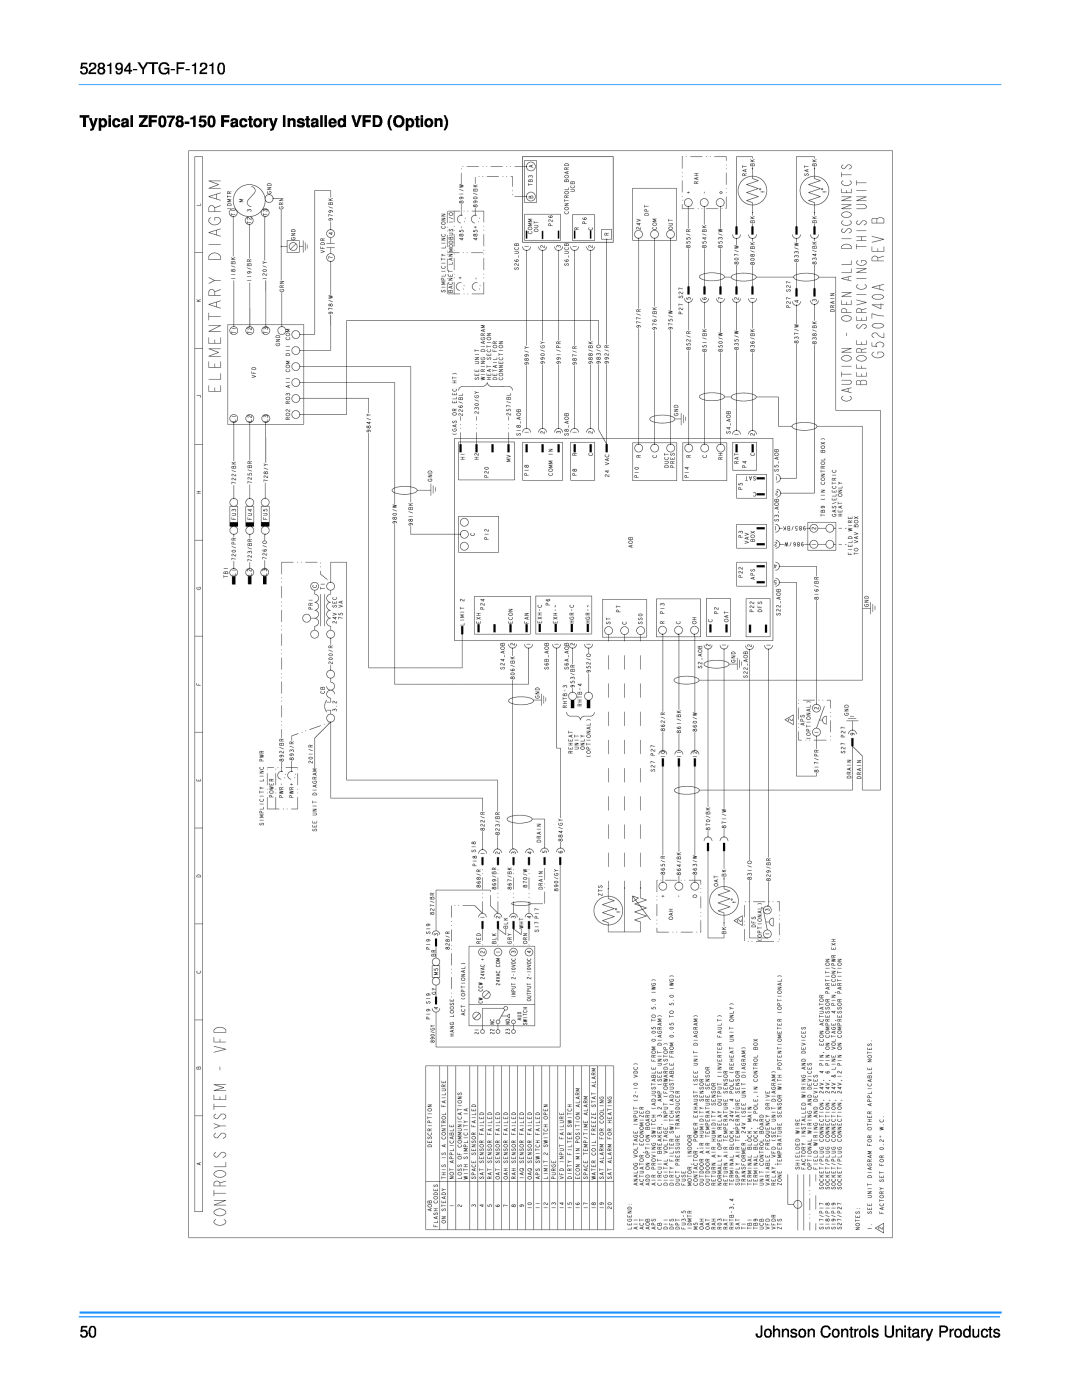 York R-410A manual YTG-F-1210, Typical ZF078-150Factory Installed VFD Option 